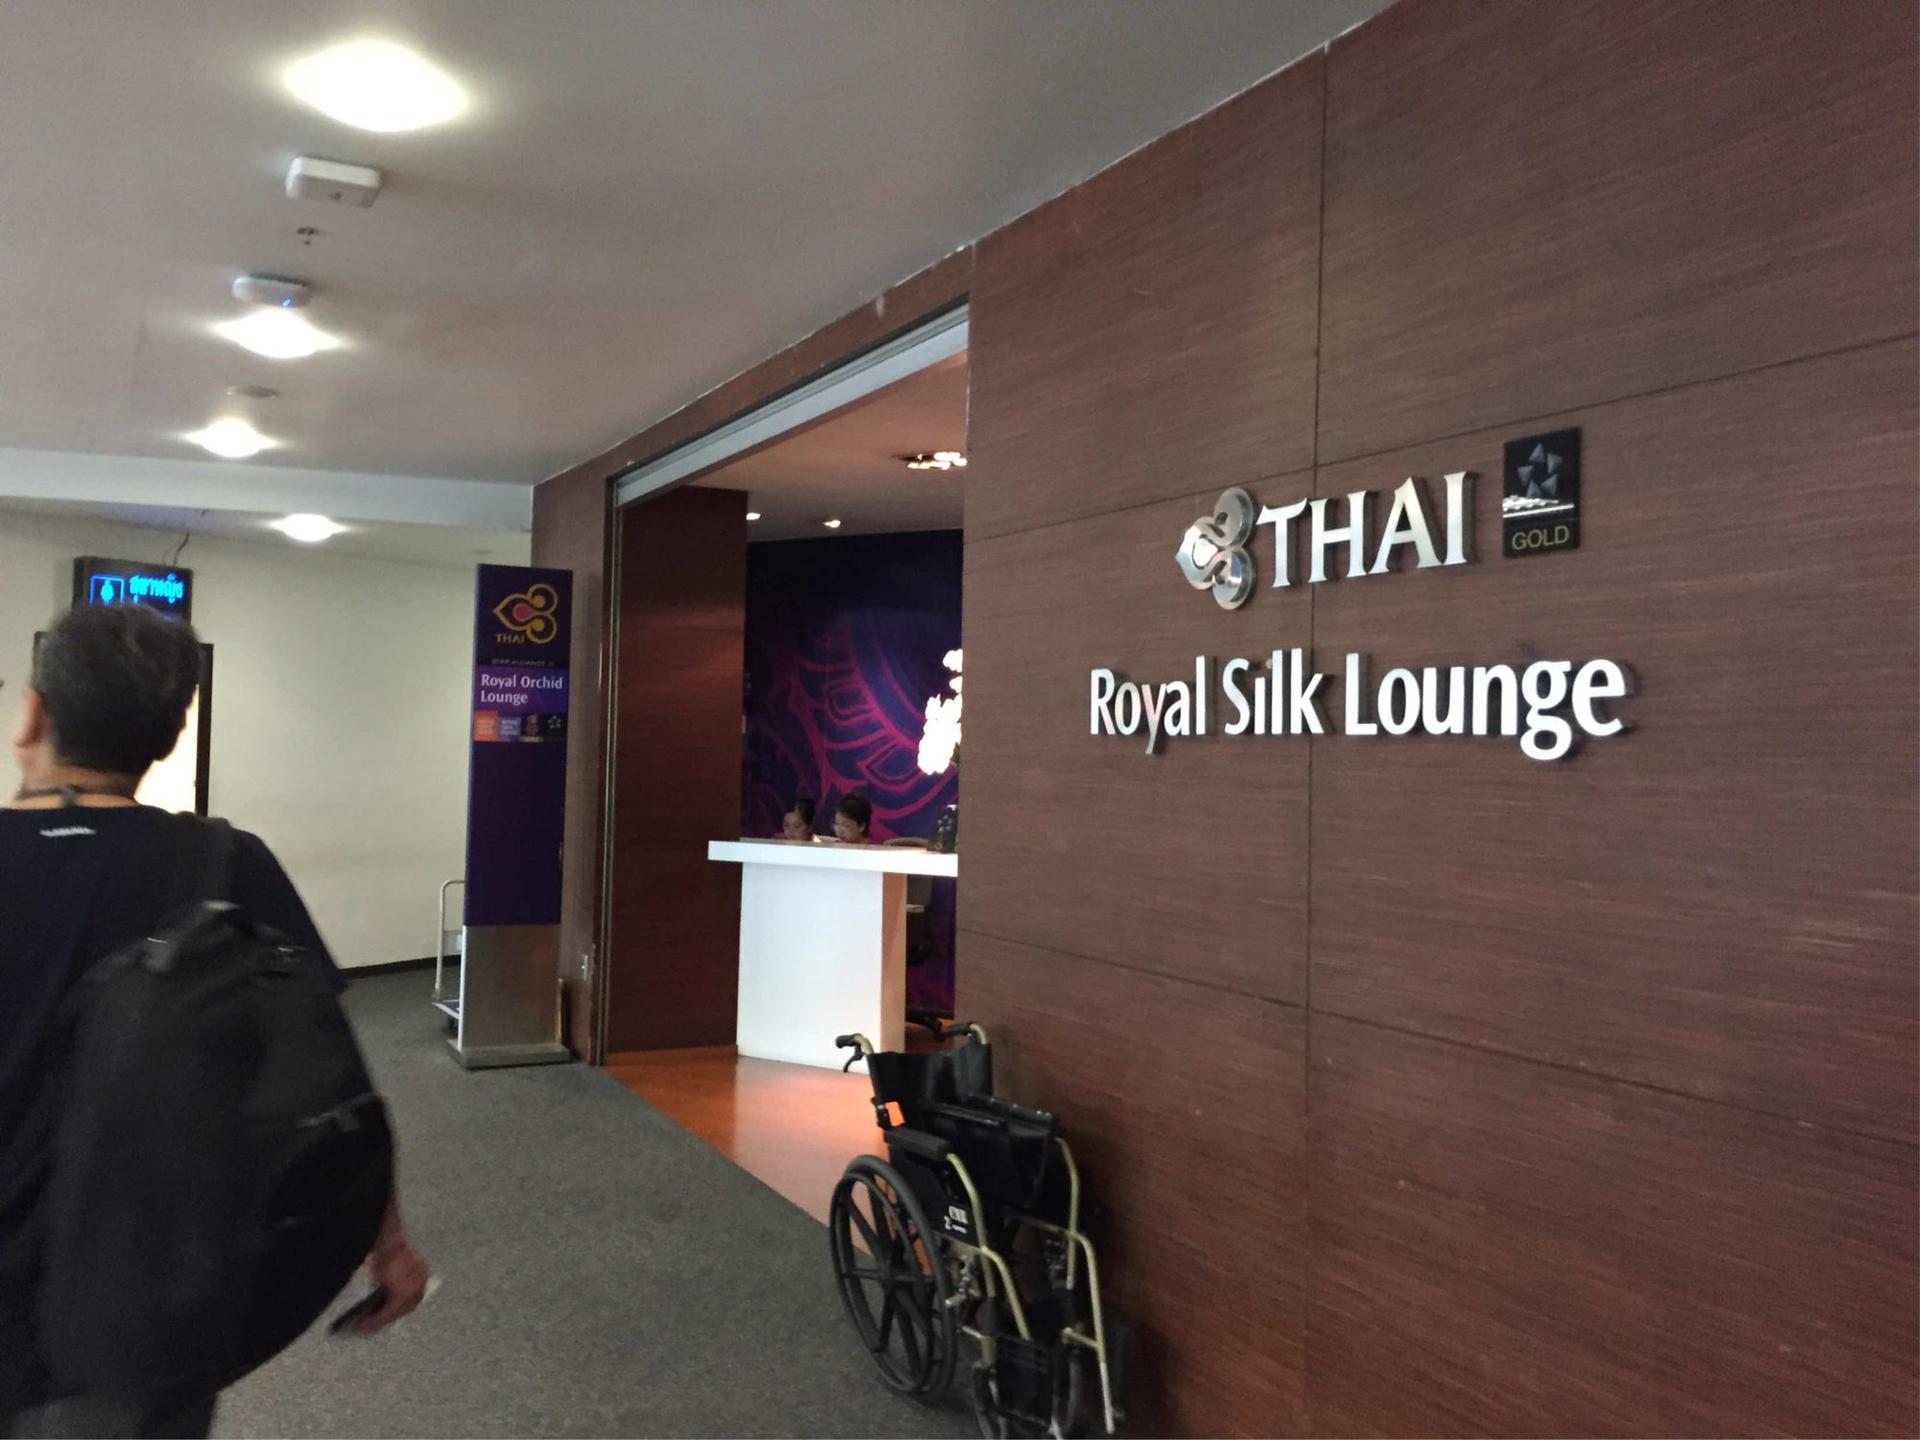 Thai Airways Royal Orchid Lounge image 13 of 22